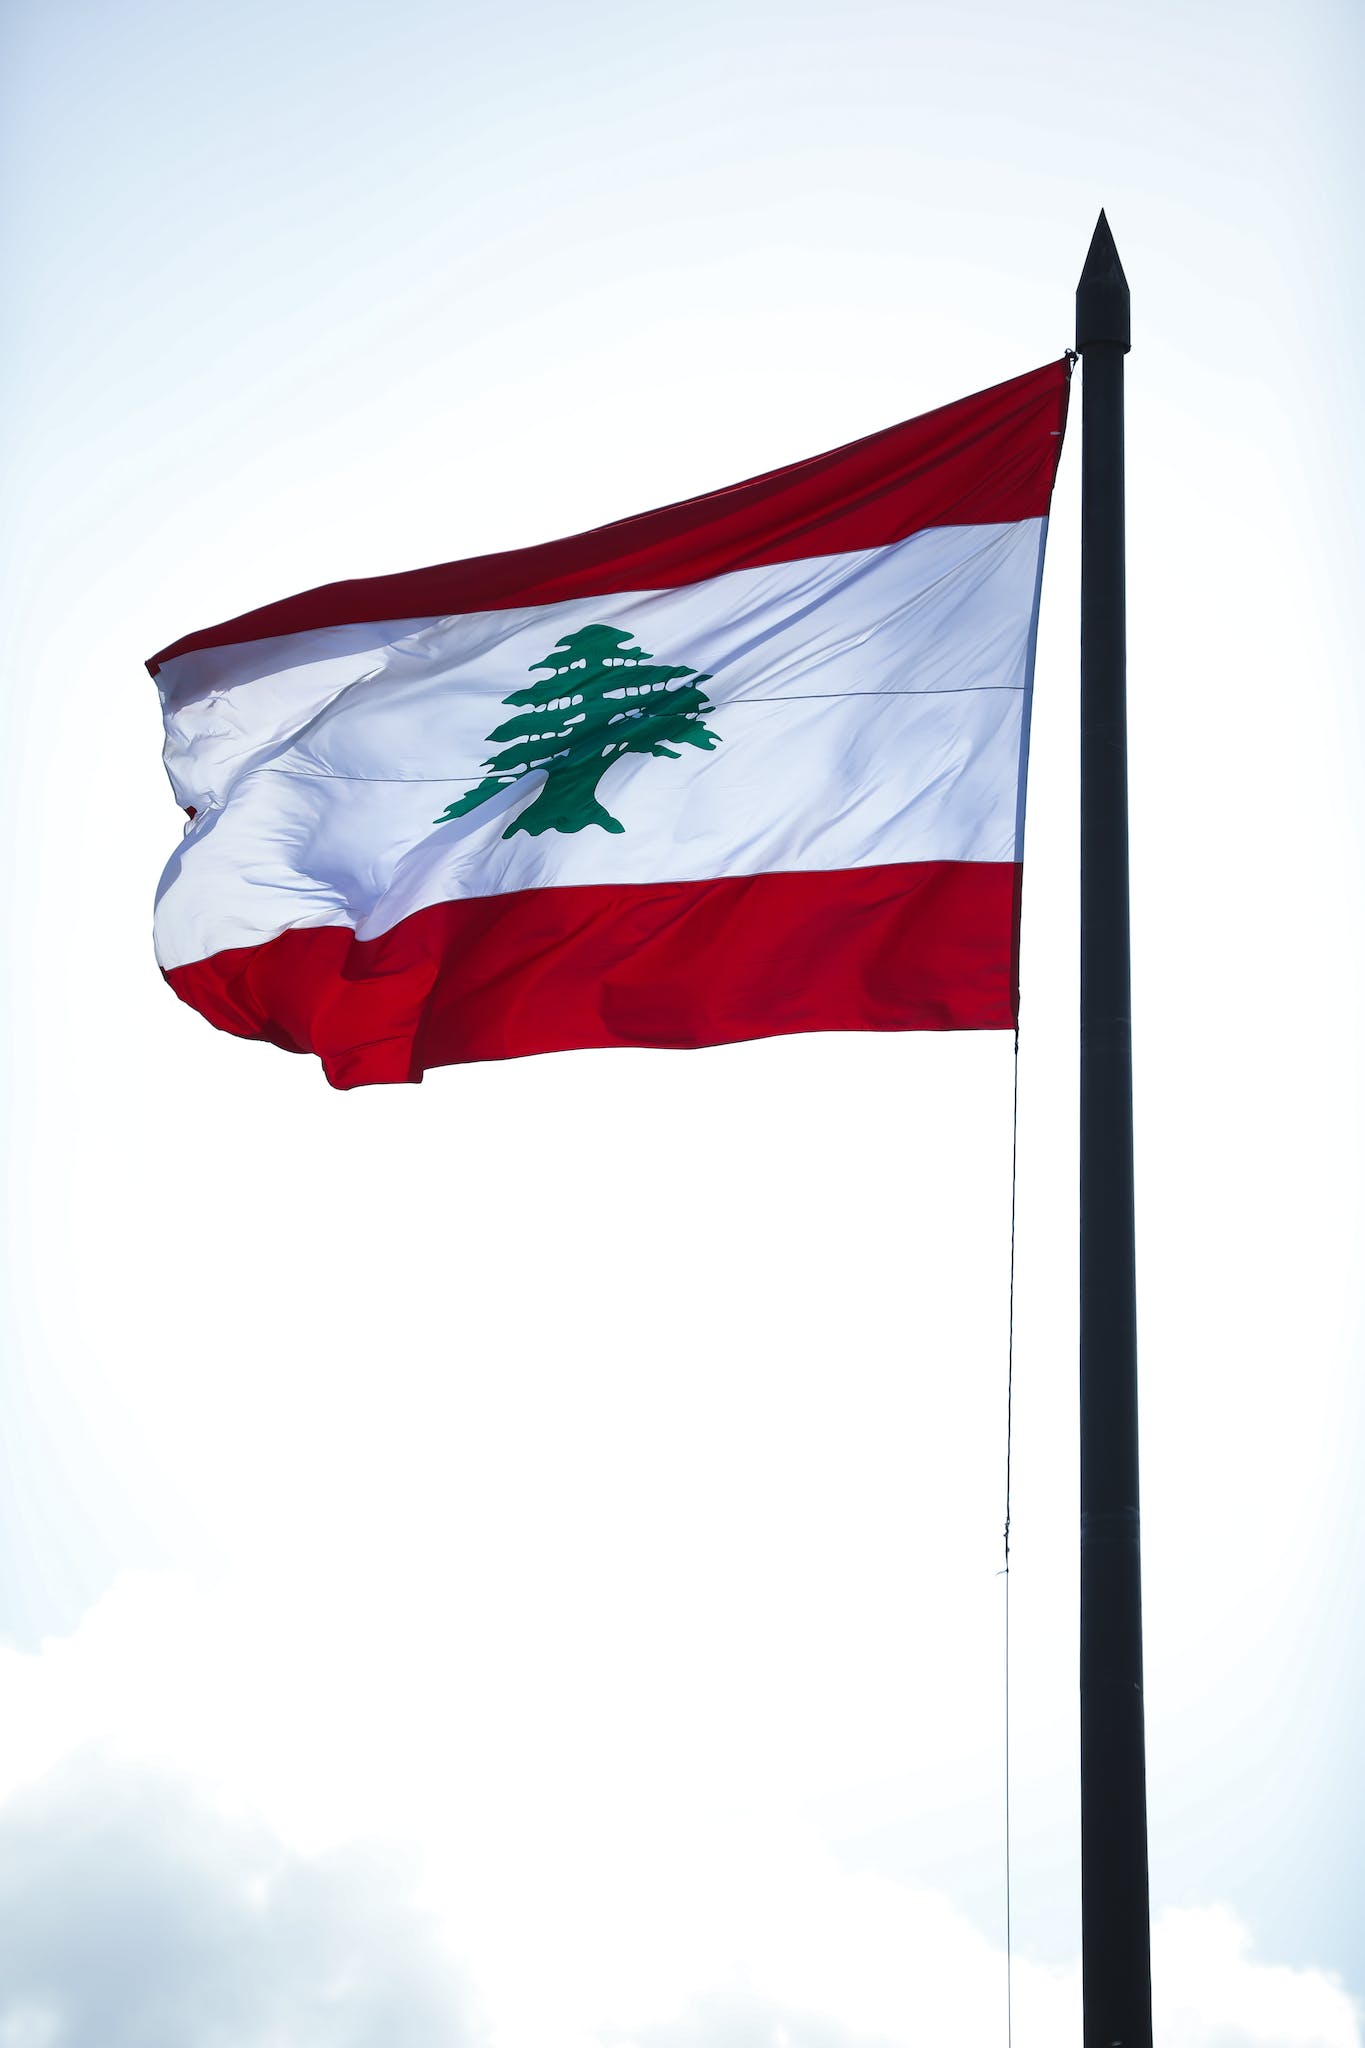 The lebanese flag is flying high in the sky